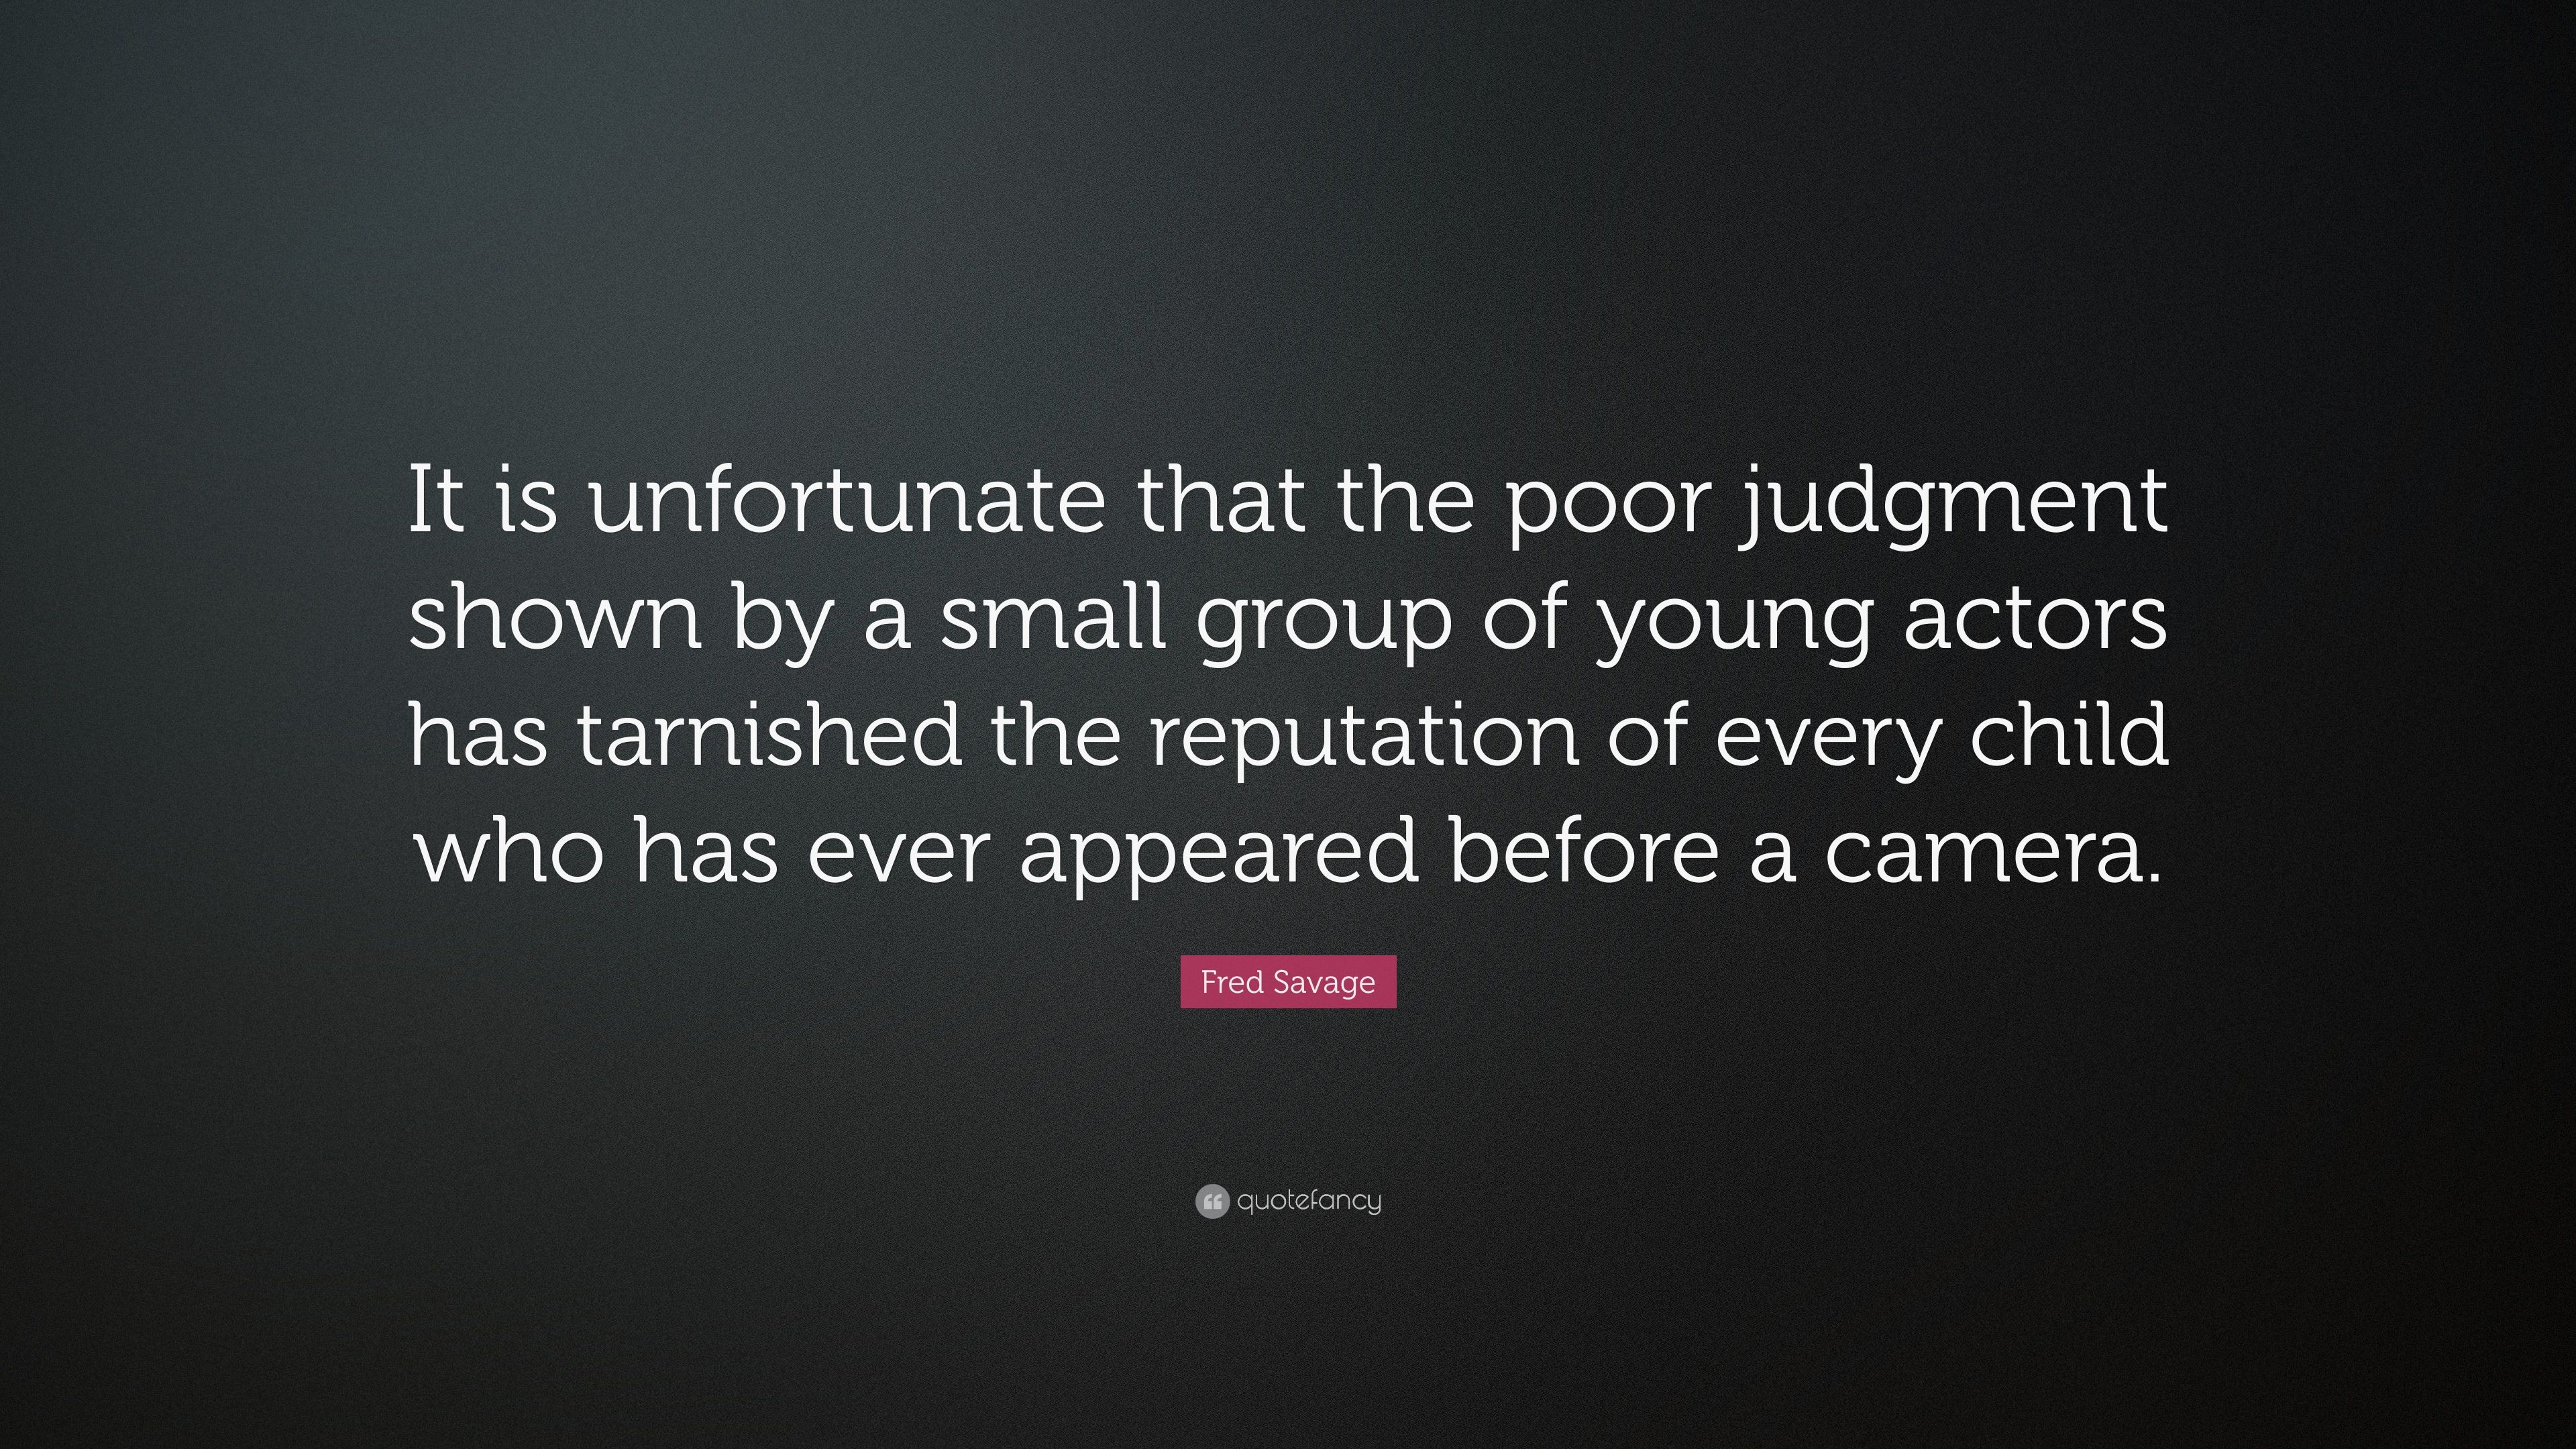 Fred Savage Quote: “It is unfortunate that the poor judgment shown